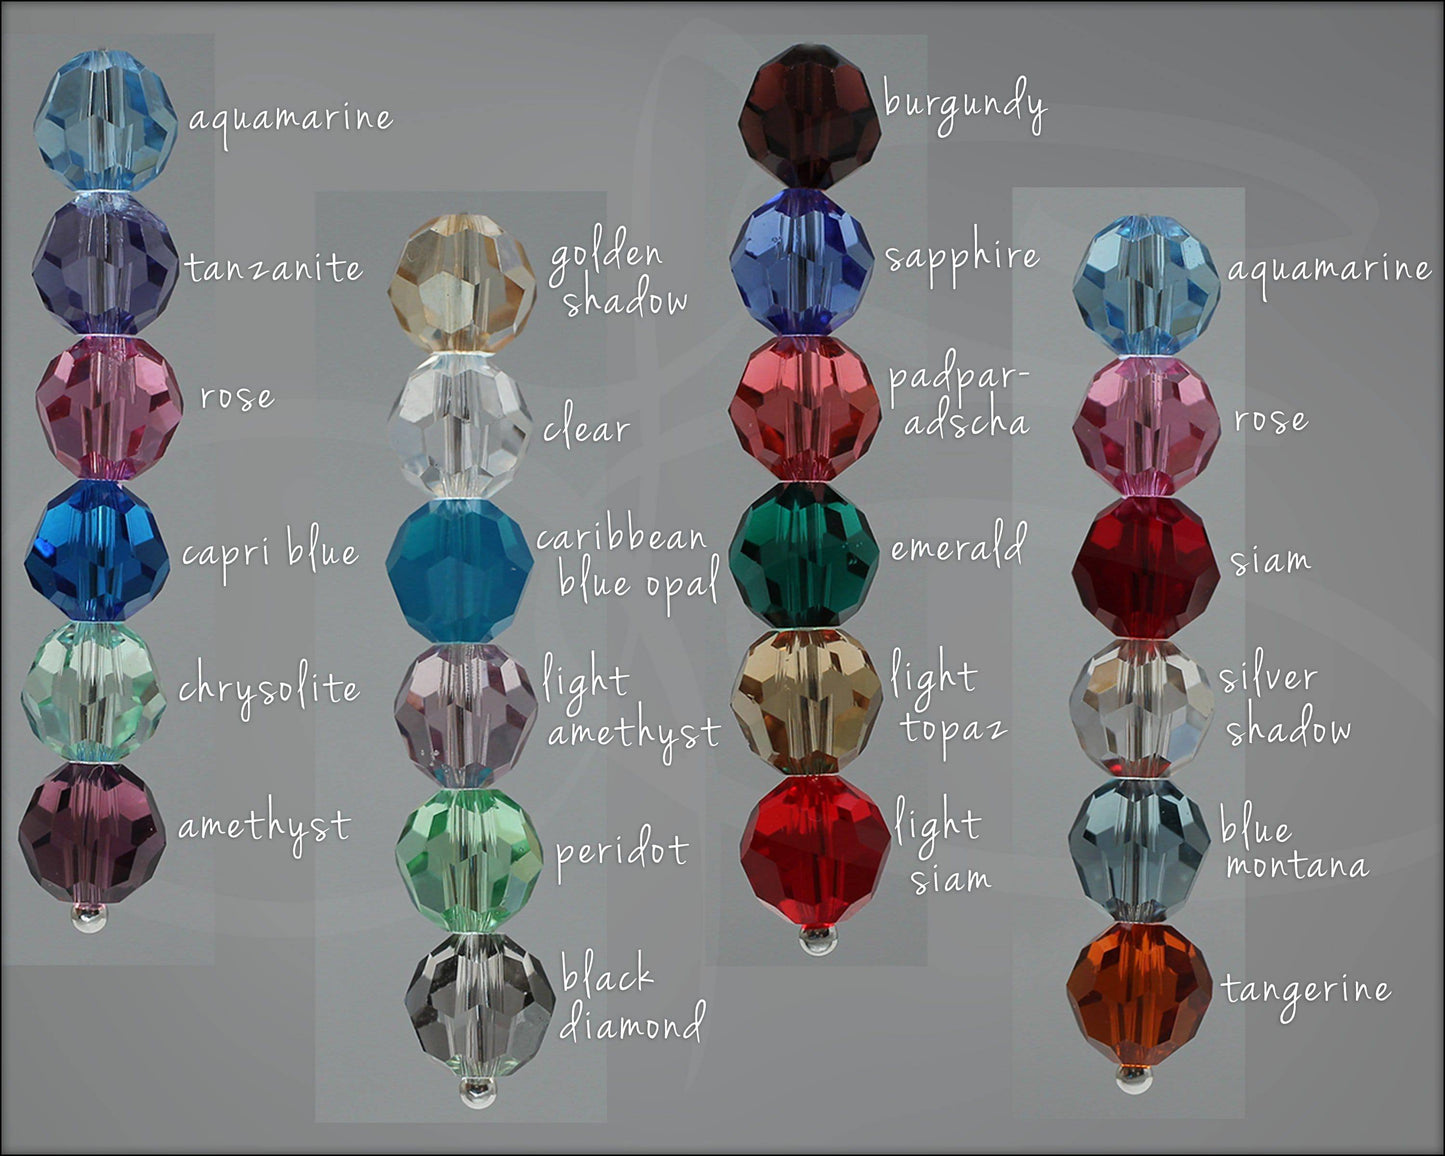 Load image into Gallery viewer, Pattern Bar Swarovski Drops - LE Jewelry Designs
